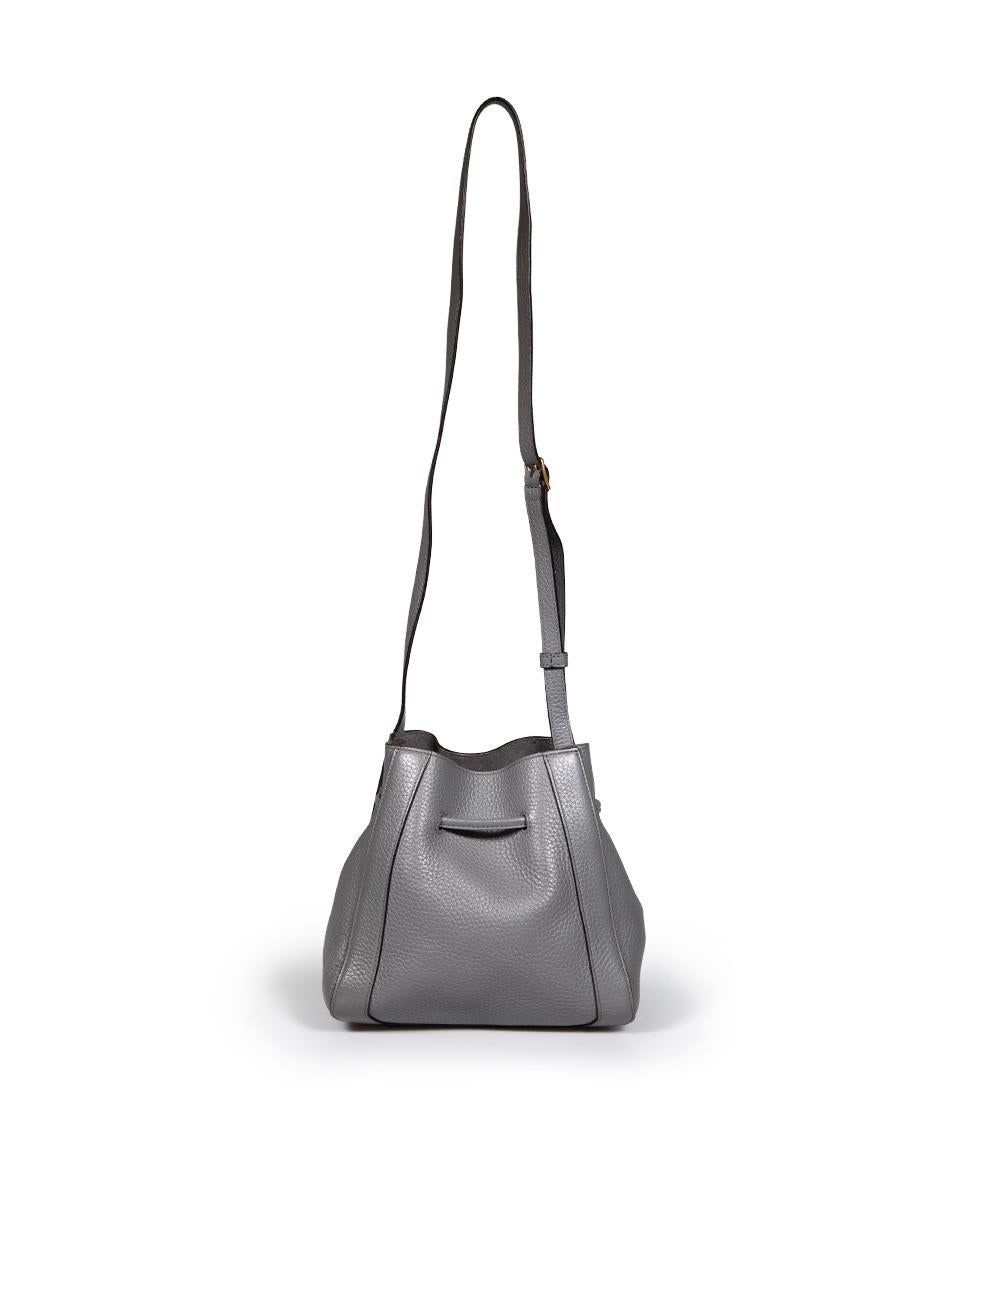 Mulberry Grey Leather Millie Mini Shoulder Bag In Excellent Condition For Sale In London, GB